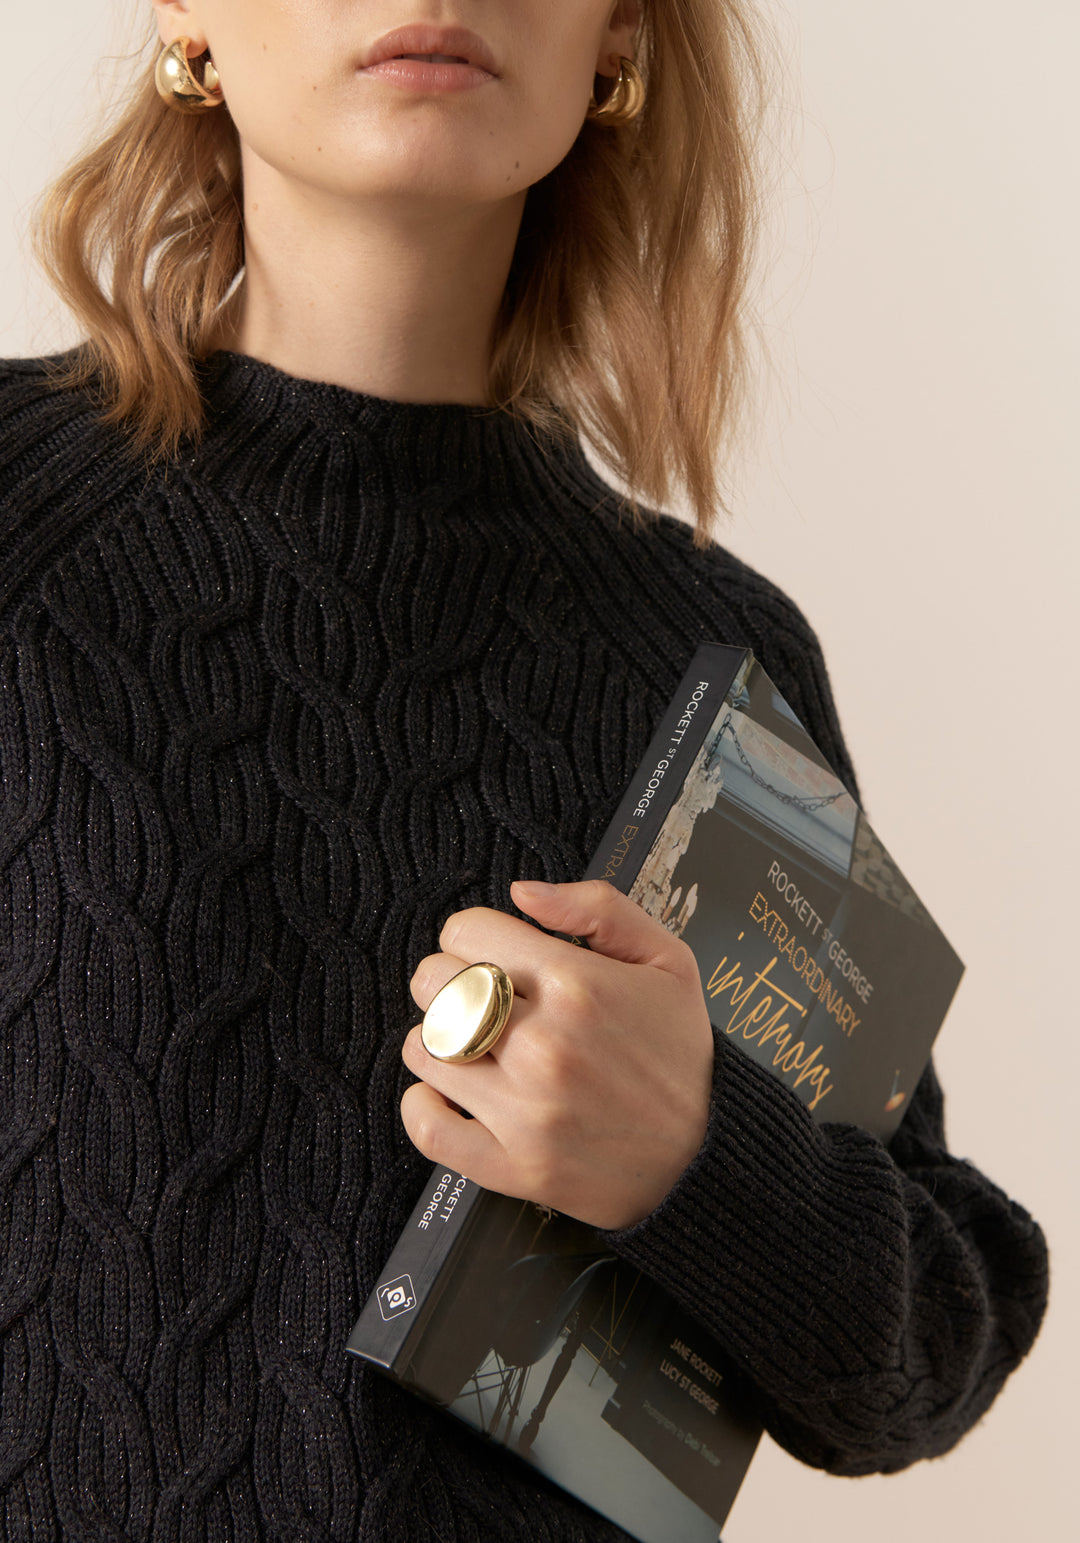 POL Clothing | Bennet Lurex Cable Knit | Charcoal